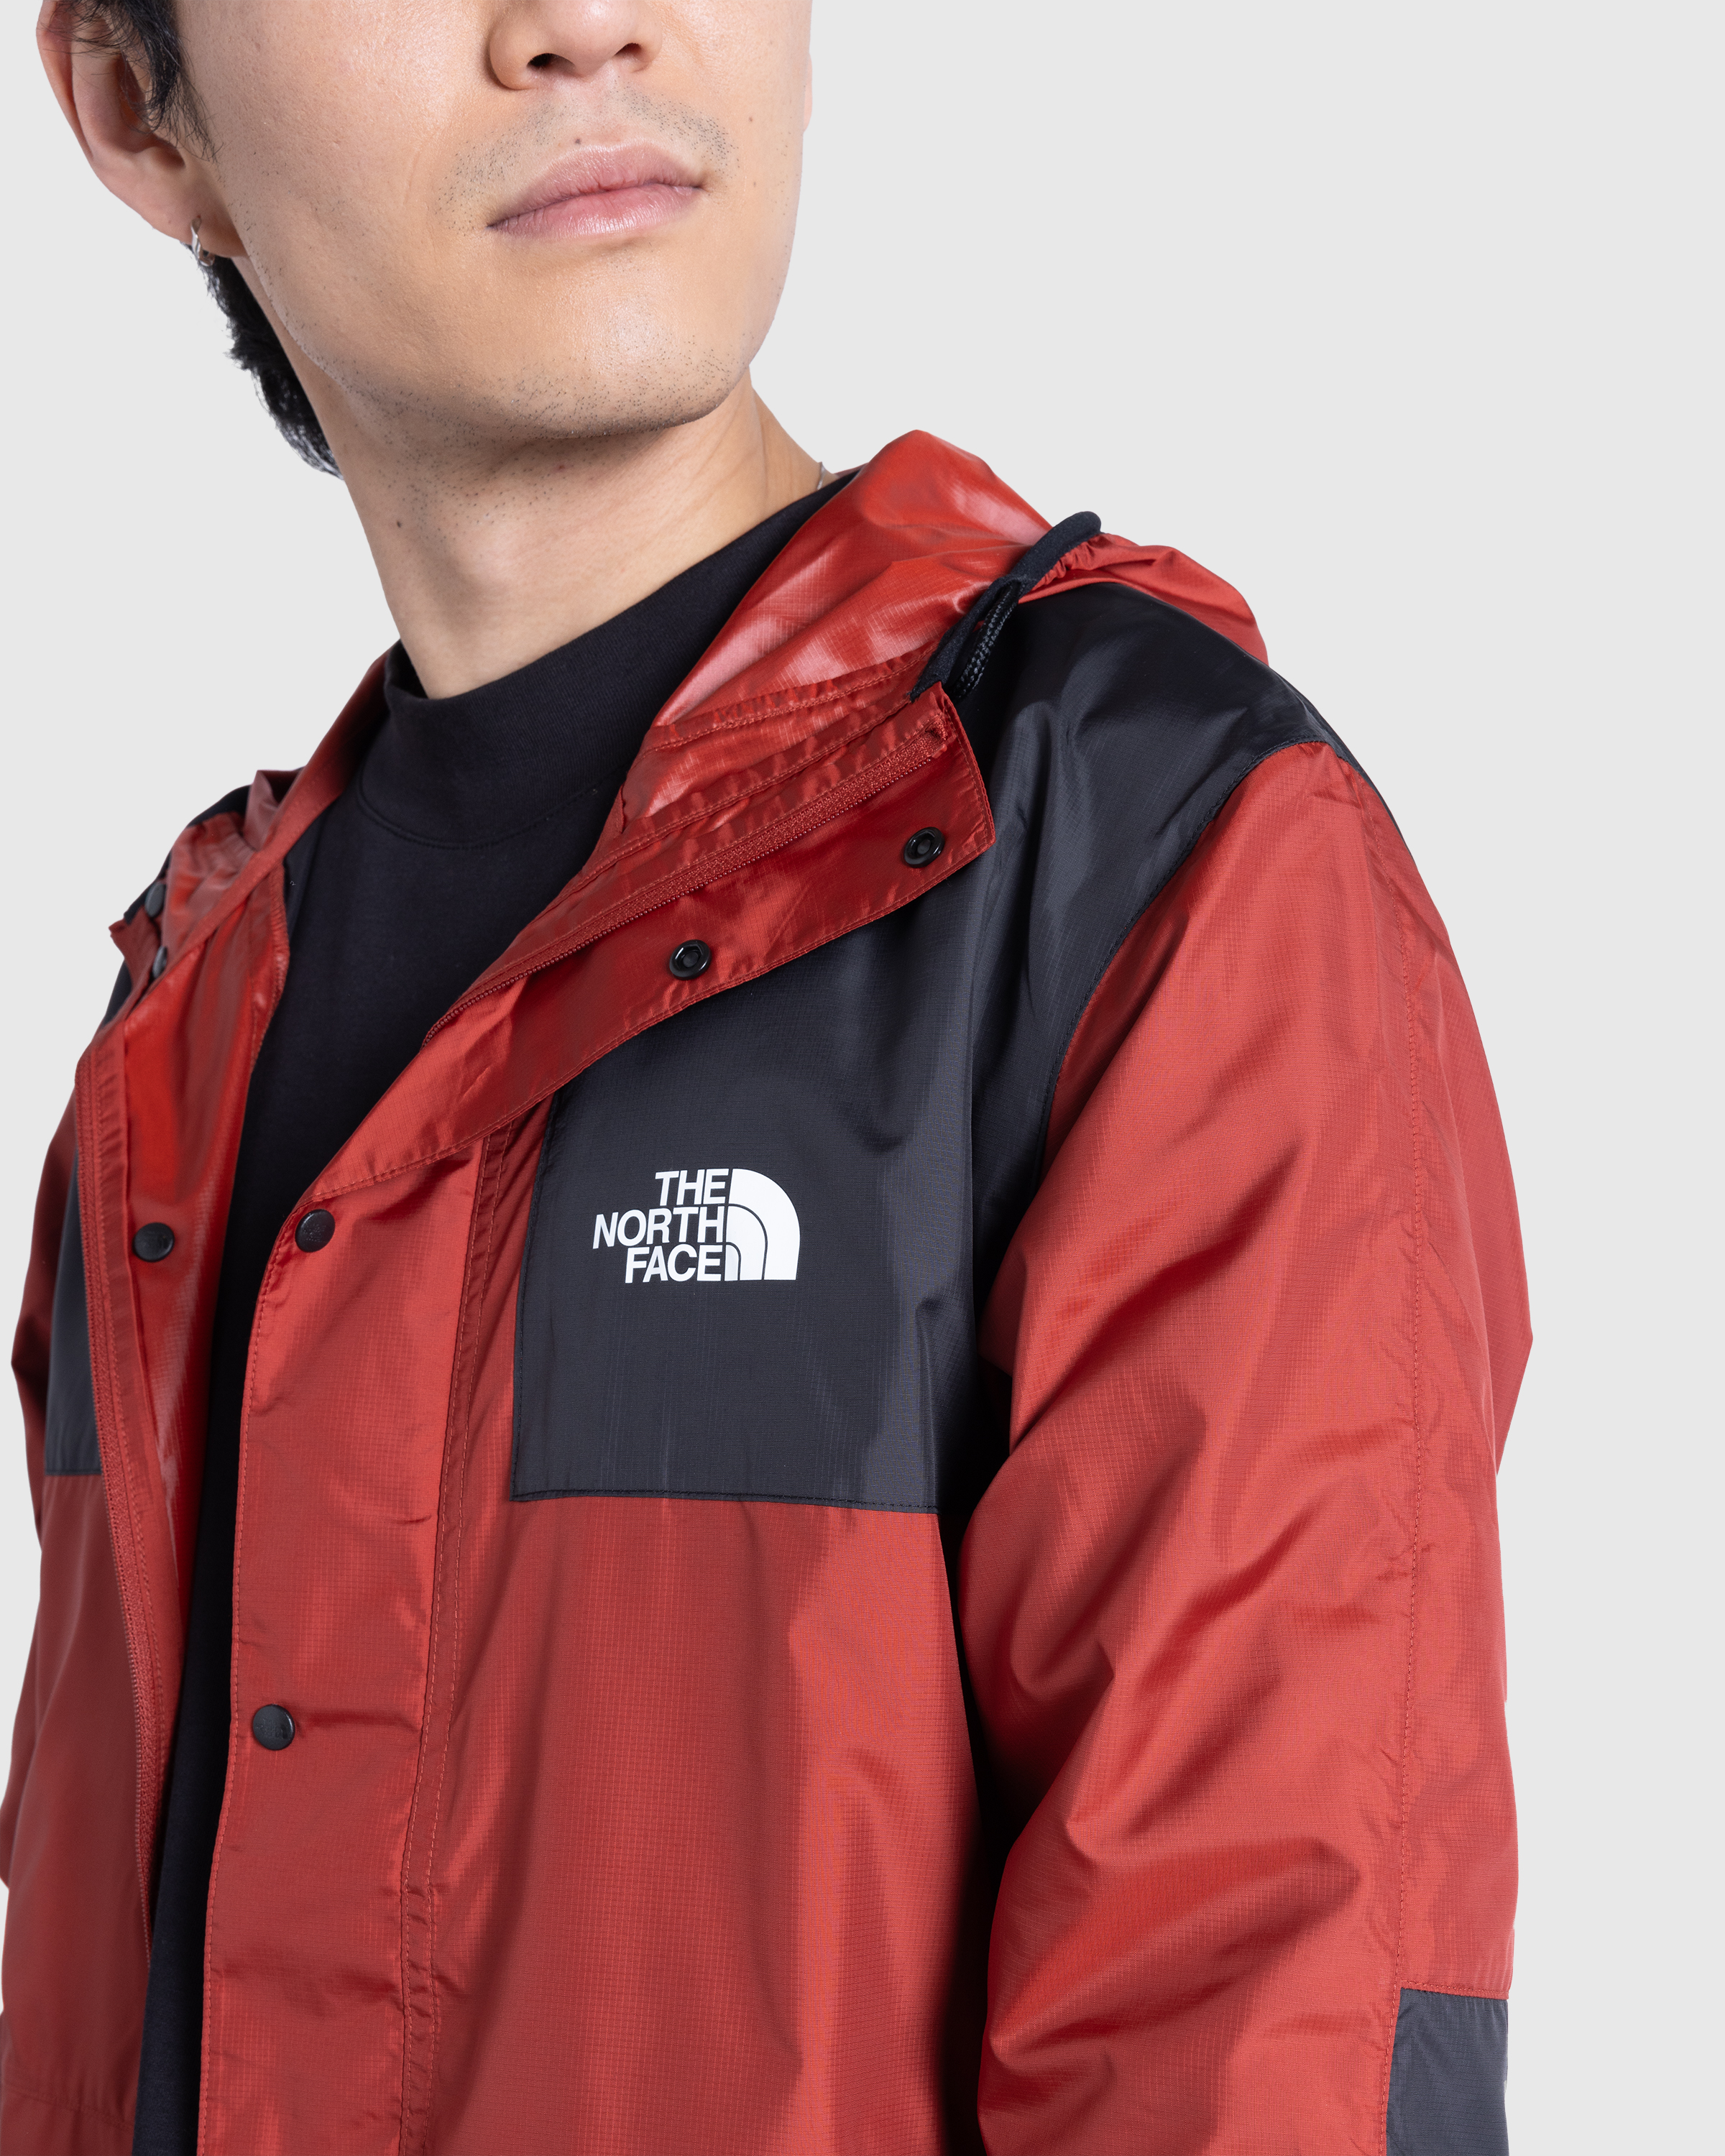 The North Face – Seasonal Mountain Jacket Iron Red - Jackets - Red - Image 5